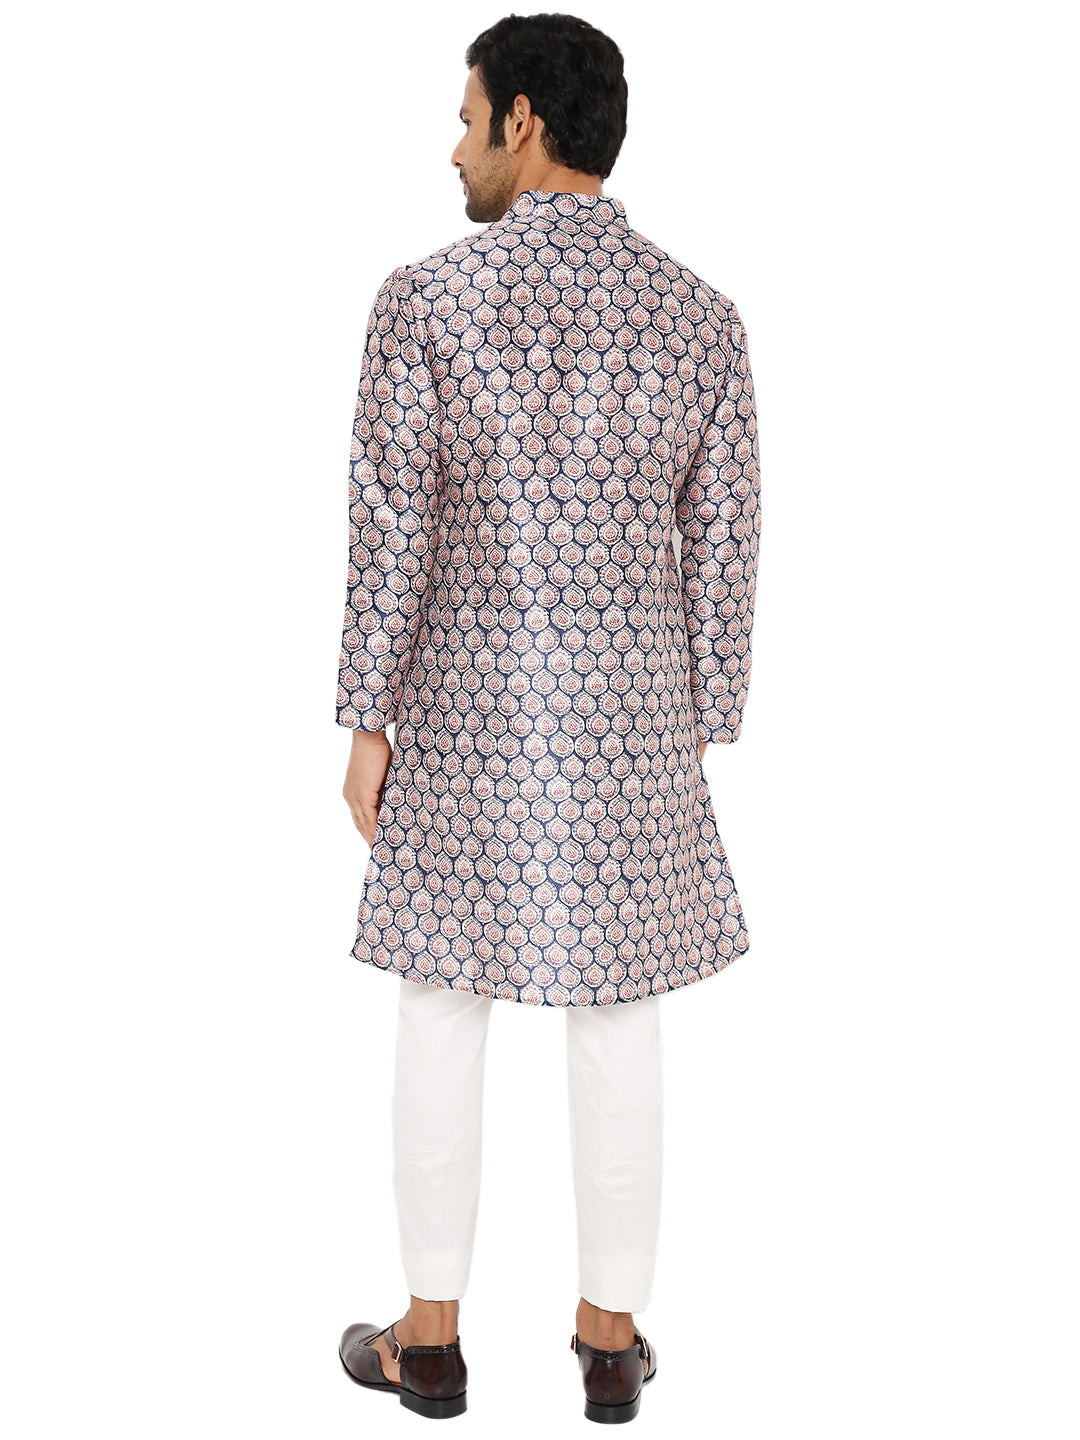 Back View of printed silk kurta with red and blue leaf print design from Be Desi